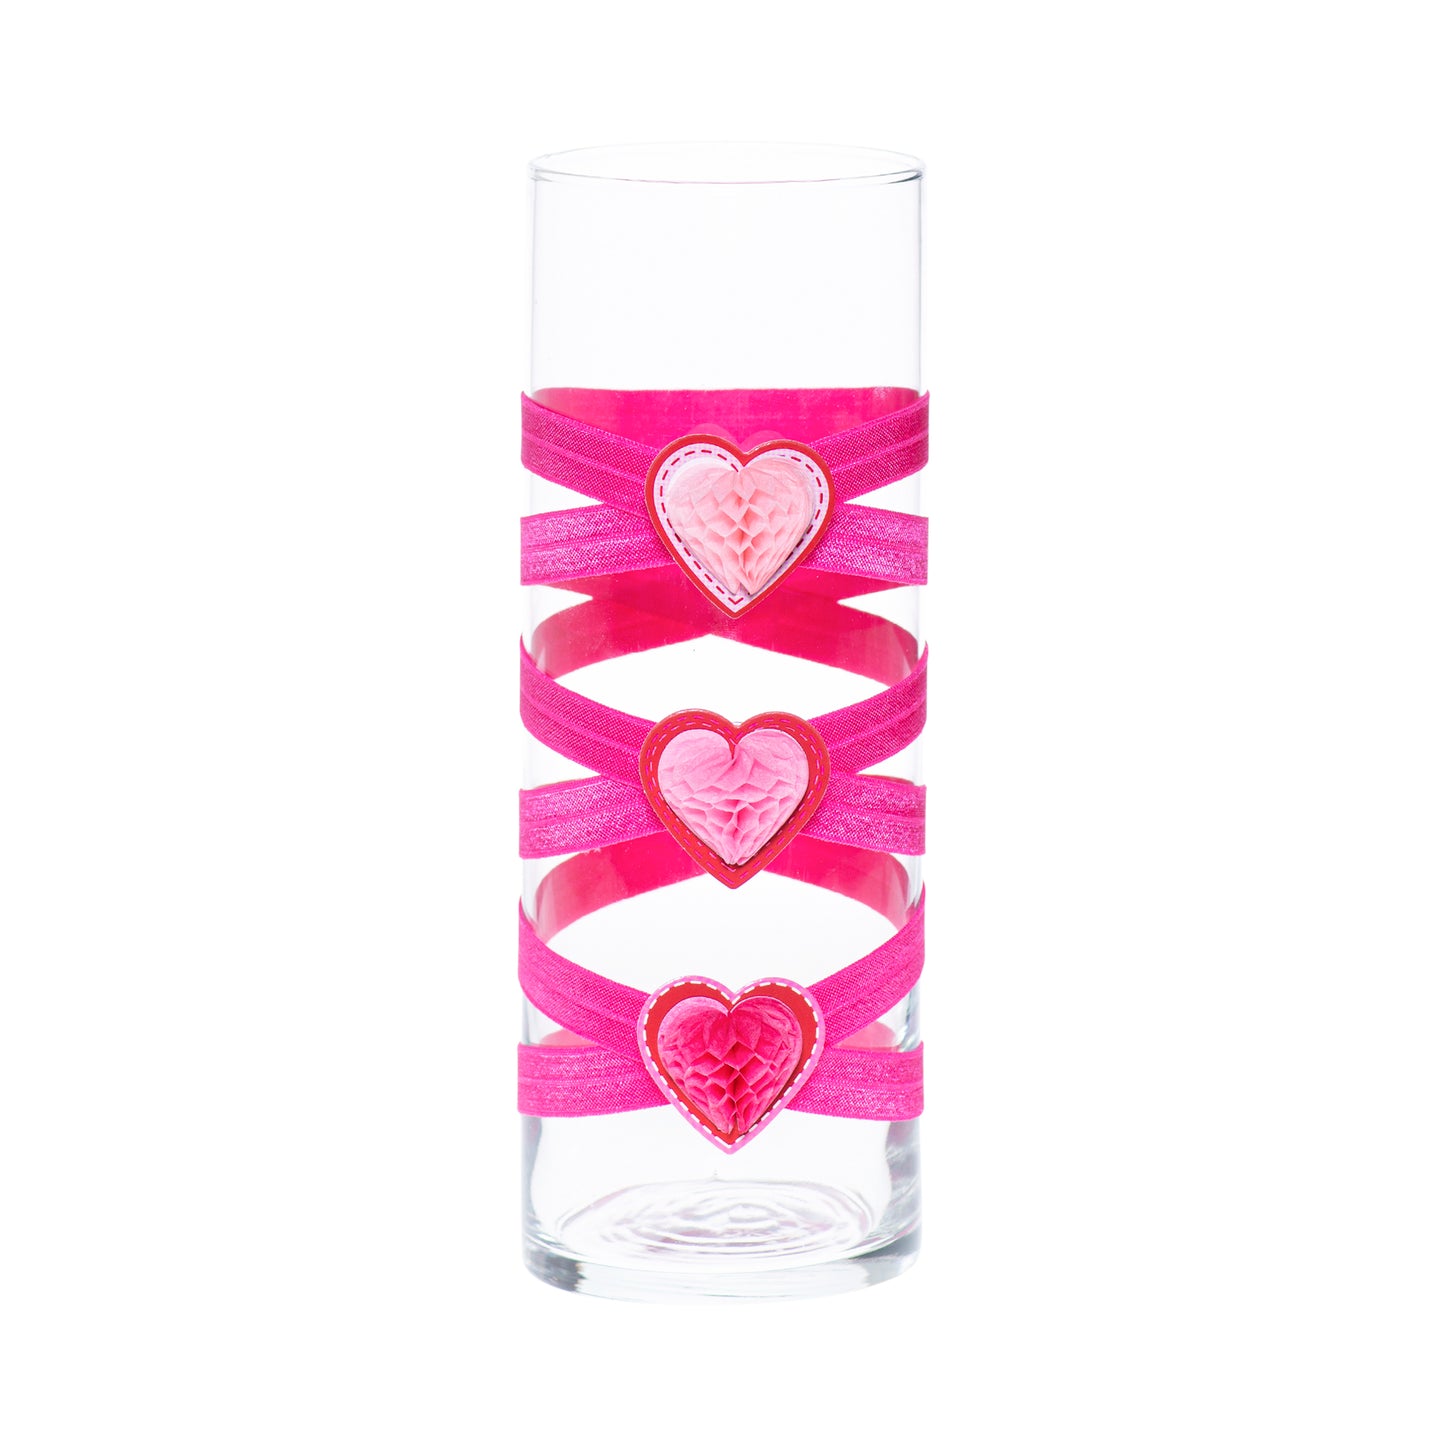 3.5" x 9.5" Vase Hot Pink 5X 5 Red White Pink Honeycomb Hearts Valentine Love Collection Complete Set